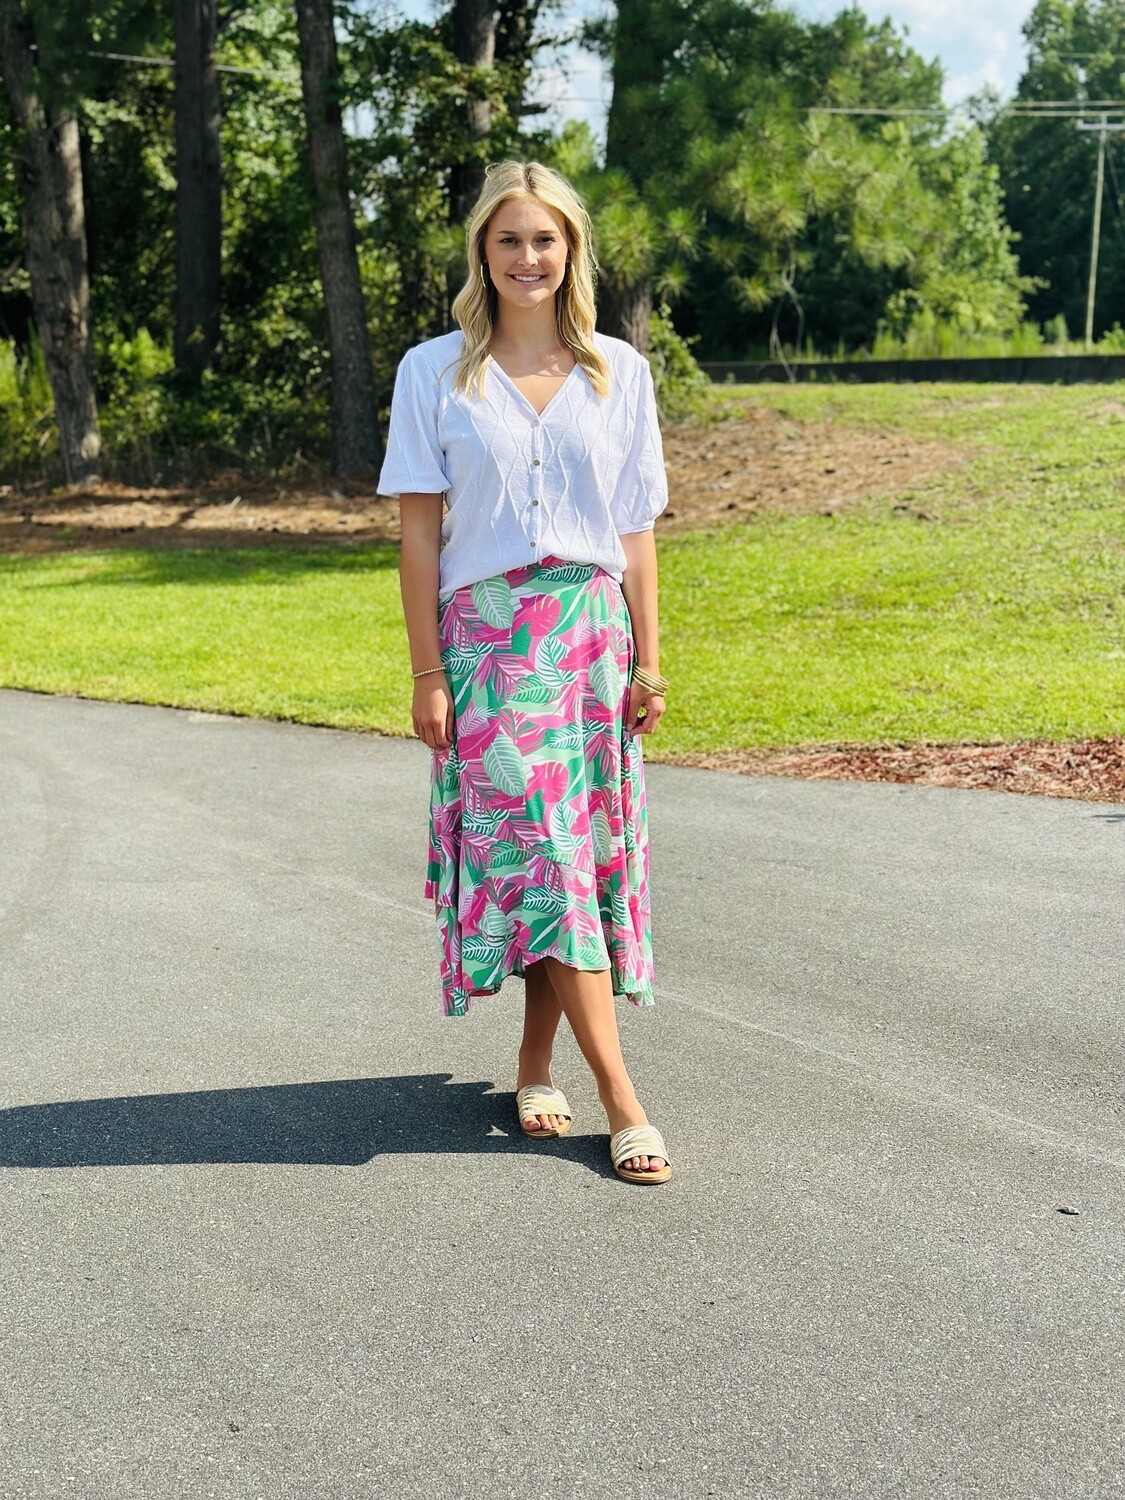 Marble Fashions Palm Leaves Skirt